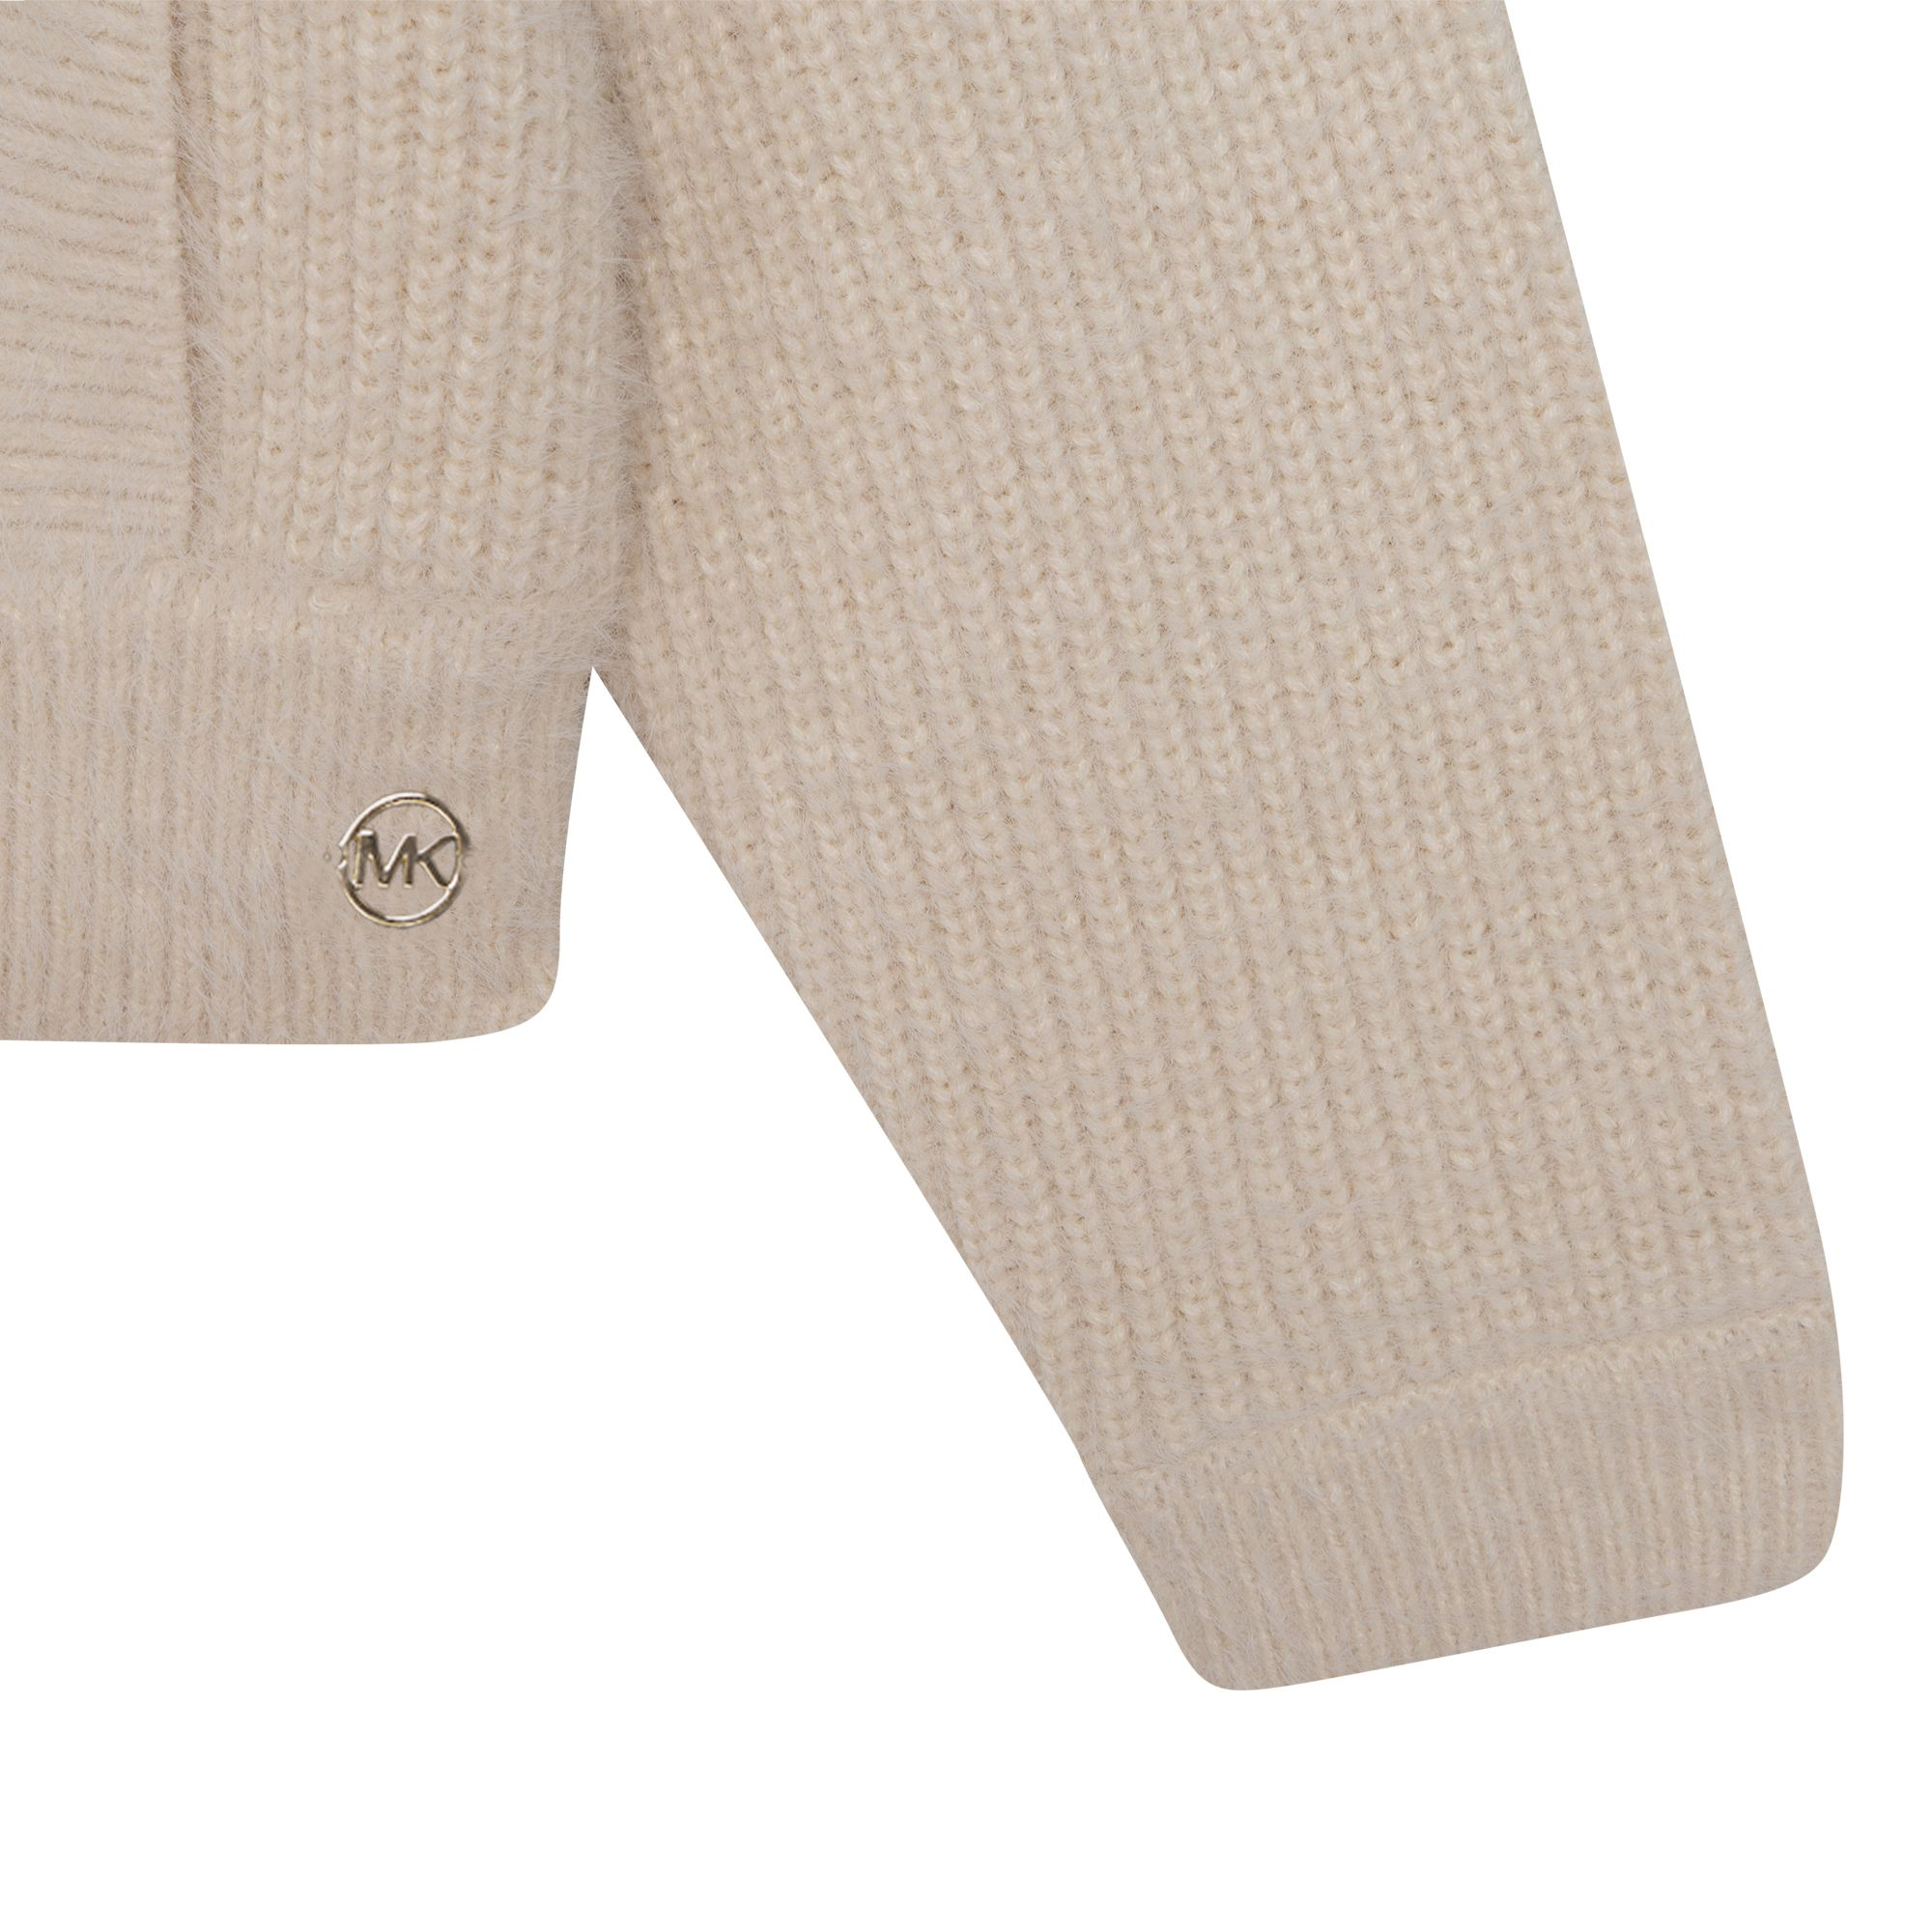 Knitted jumper with frills MICHAEL KORS for GIRL